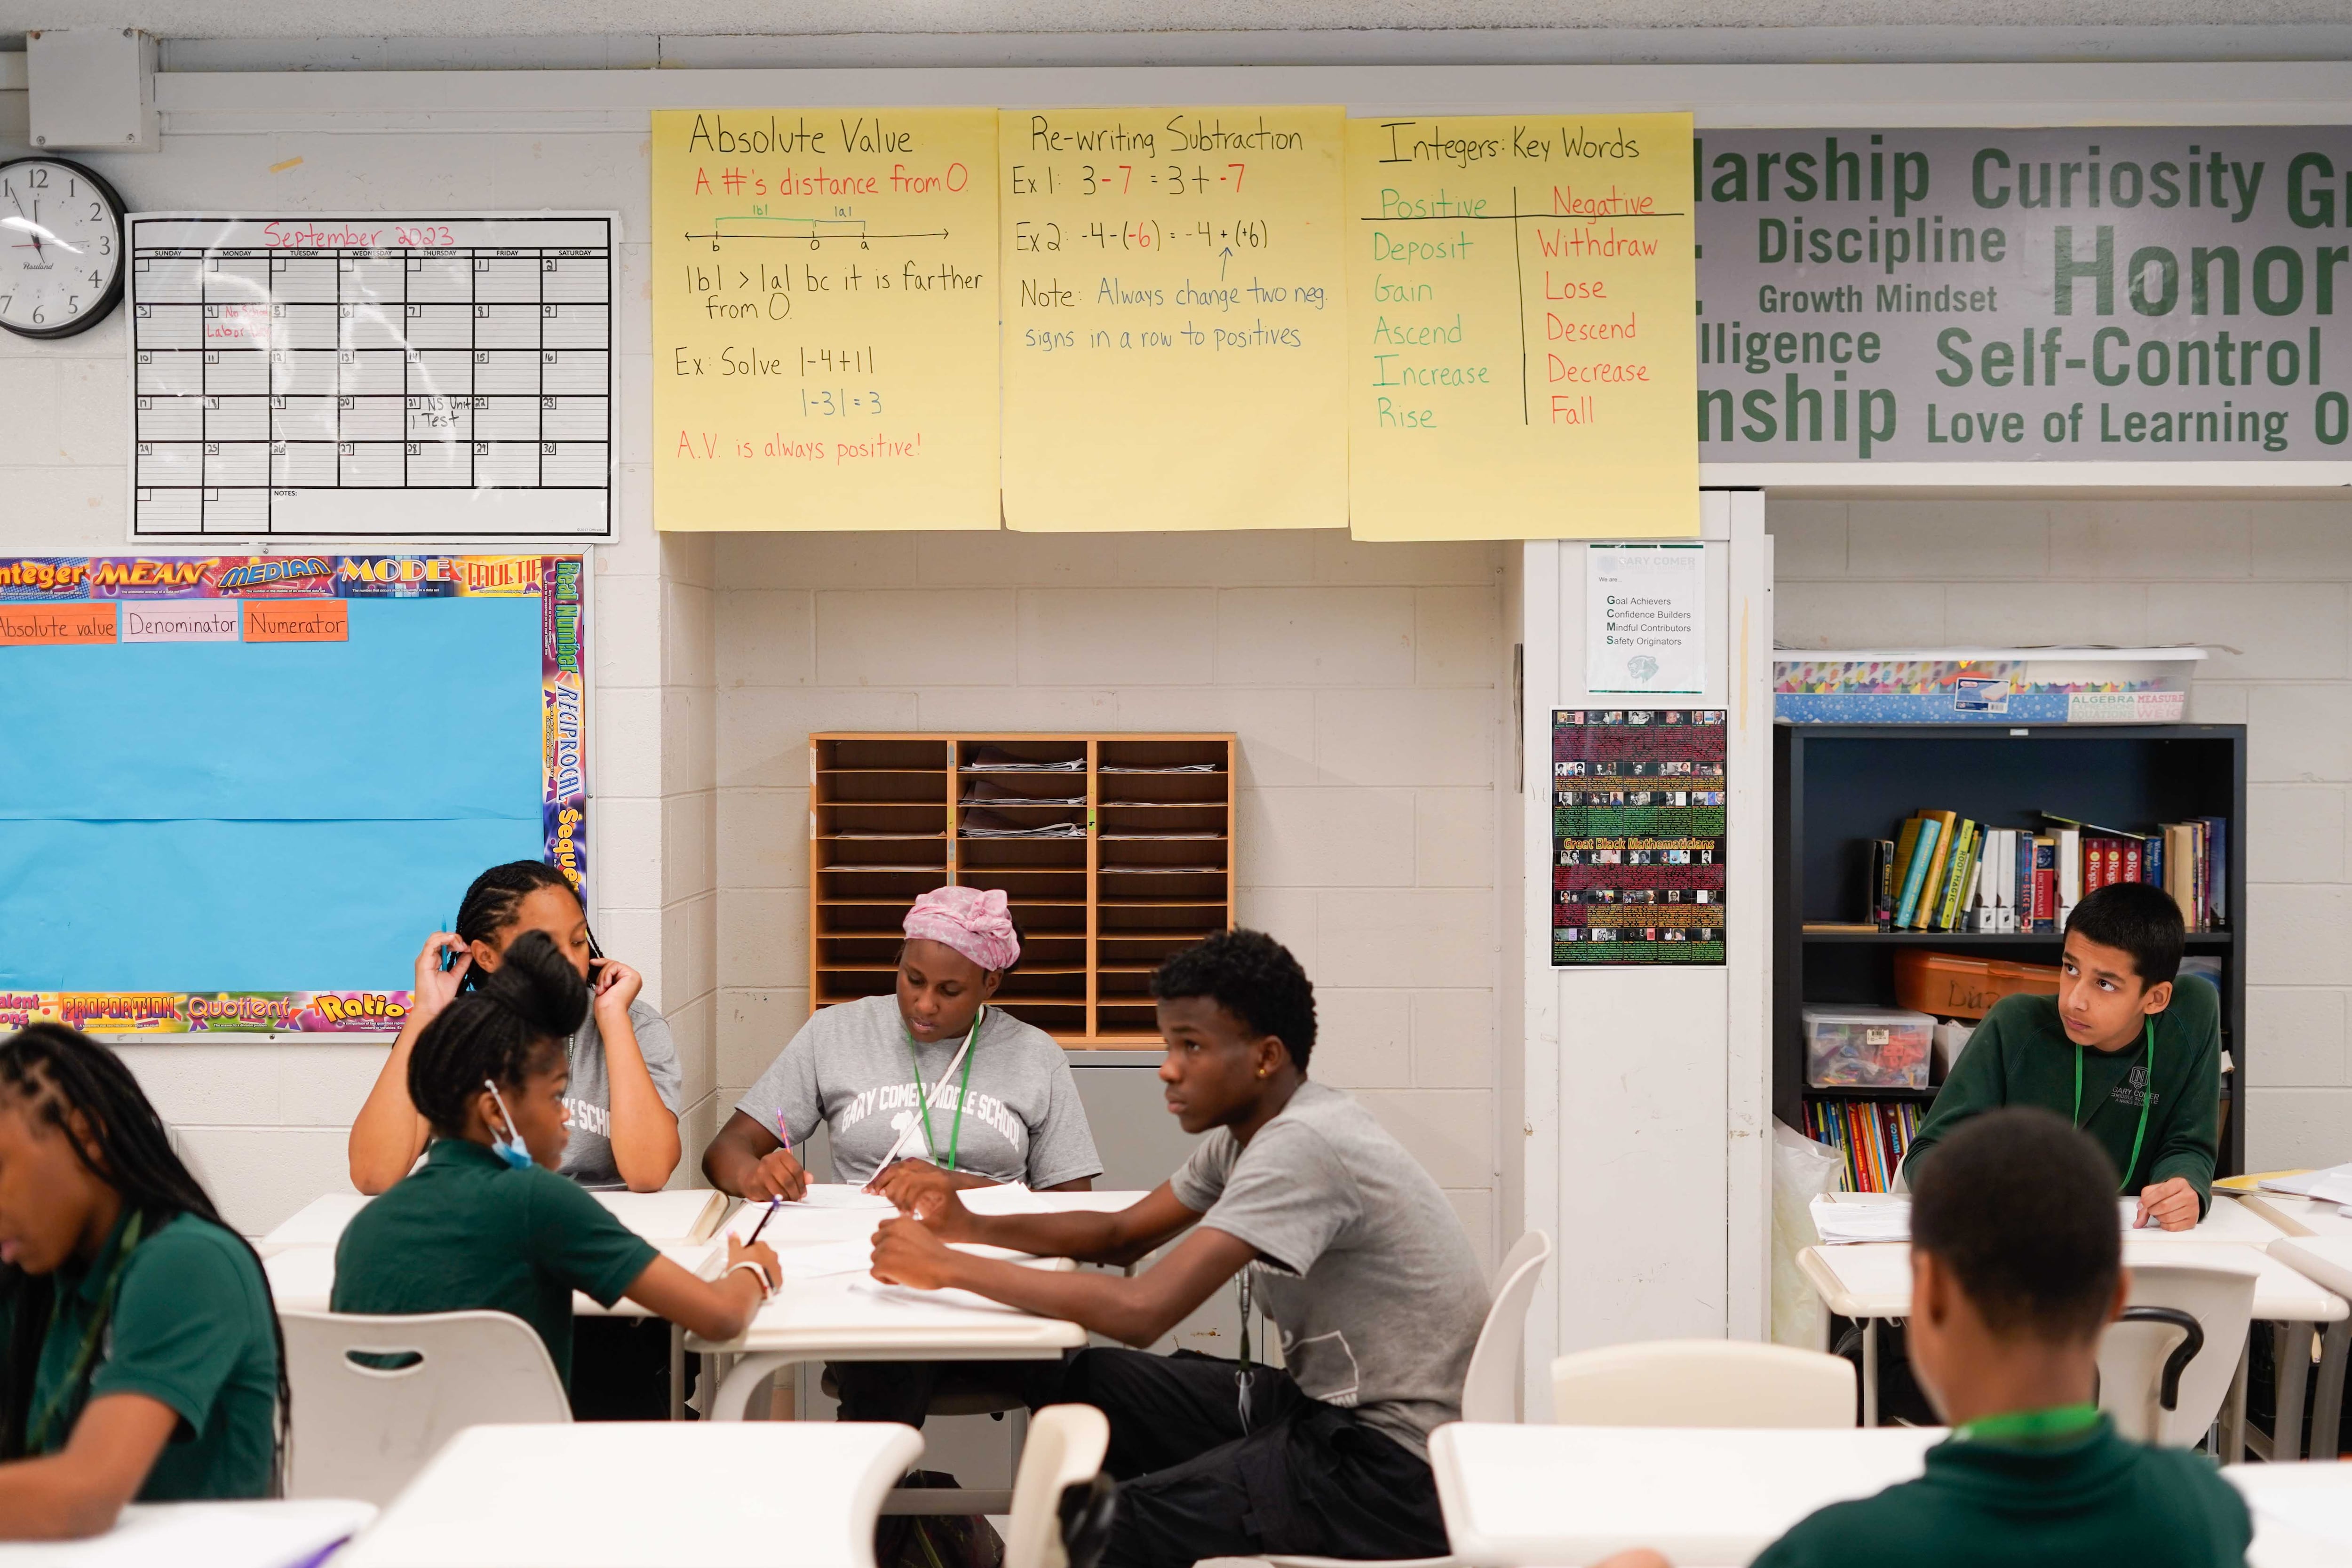 Students sit at their desks with a wall full of posters in the background.